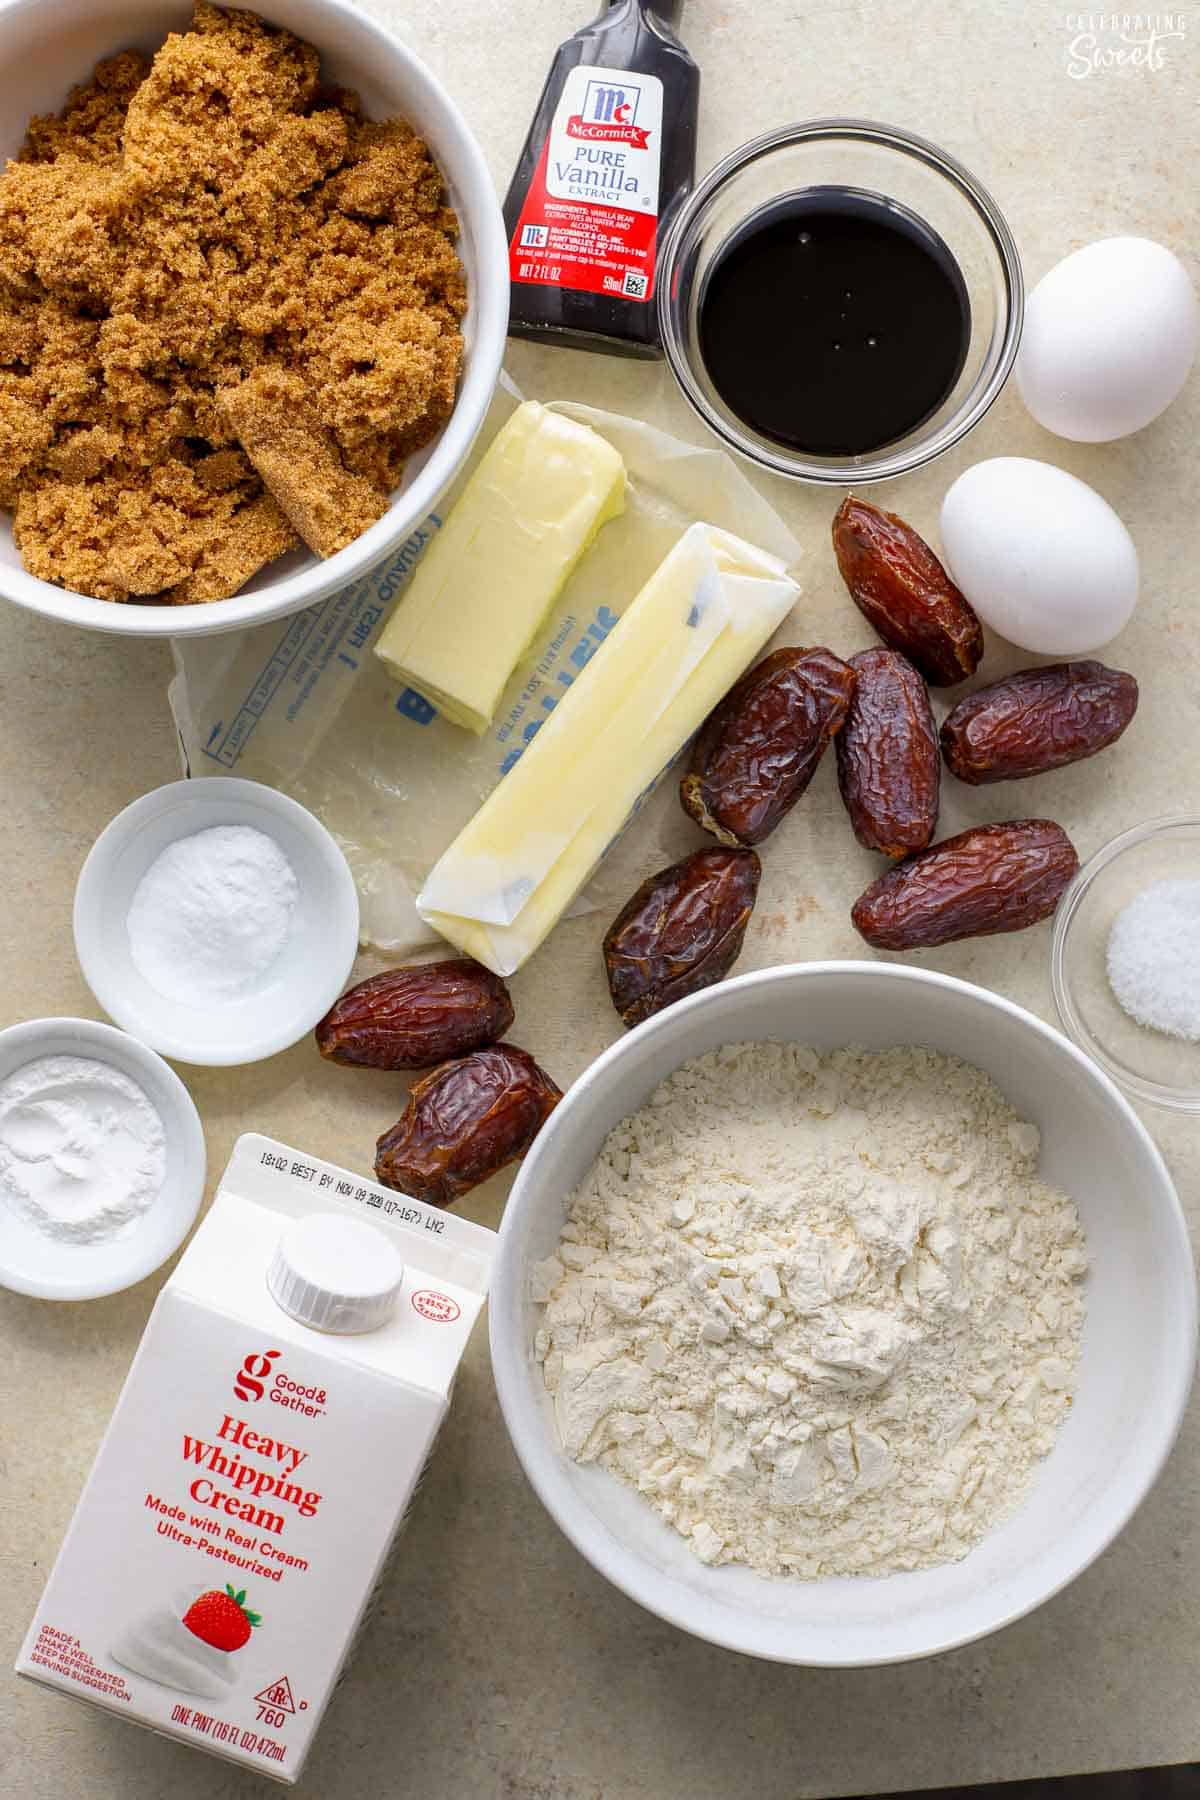 Ingredients to make sticky toffee pudding (cream, flour, dates, butter, eggs, brown sugar, vanilla).